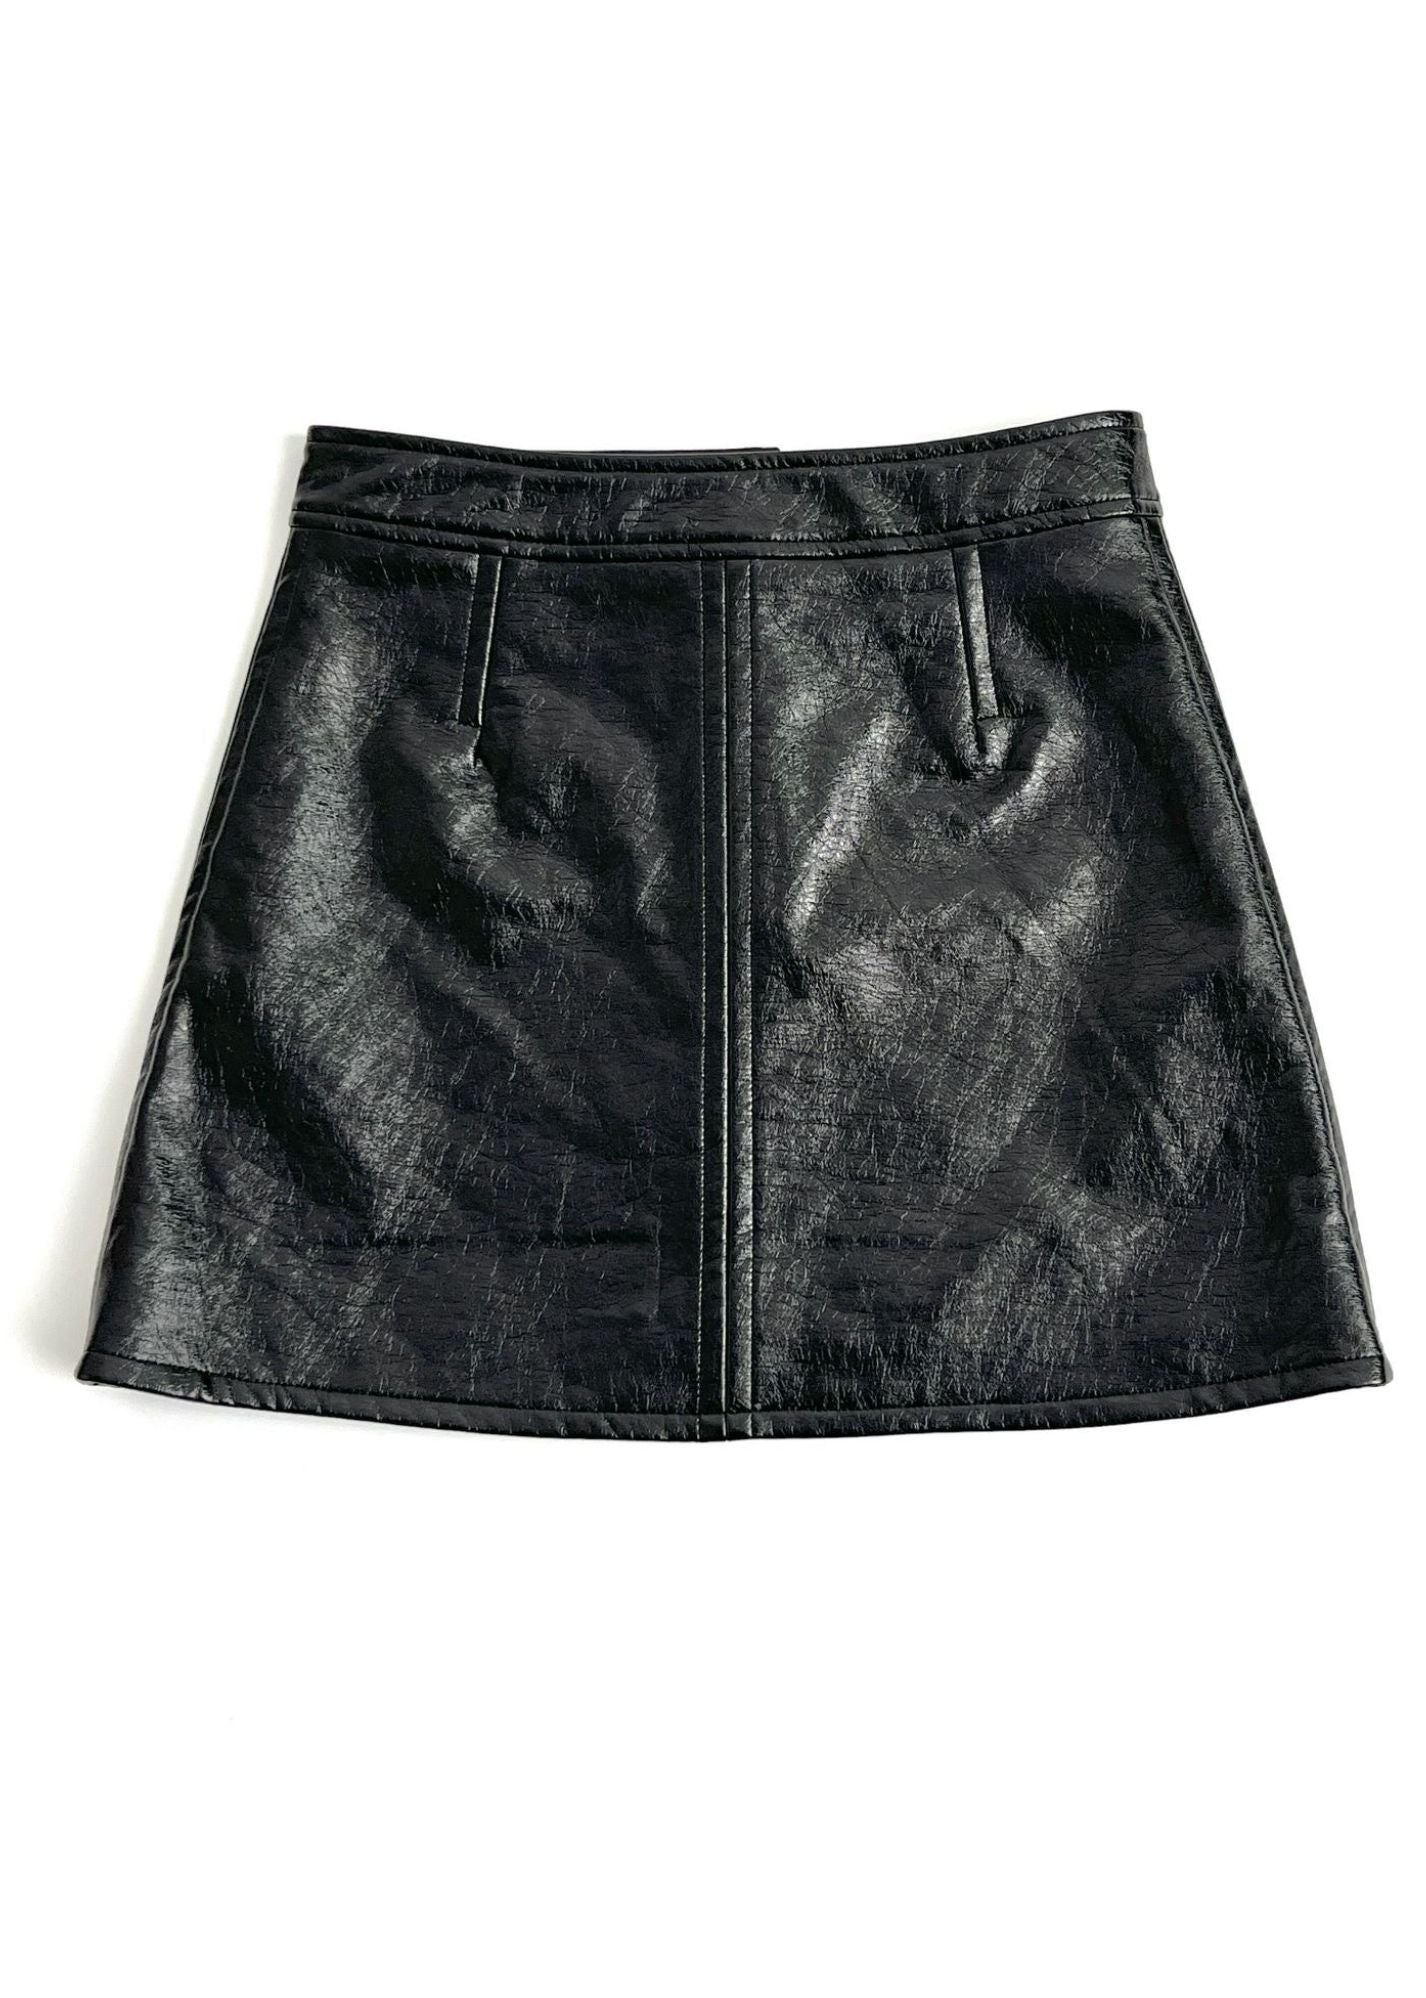 Women's Casual PU Leather Hip Skirt